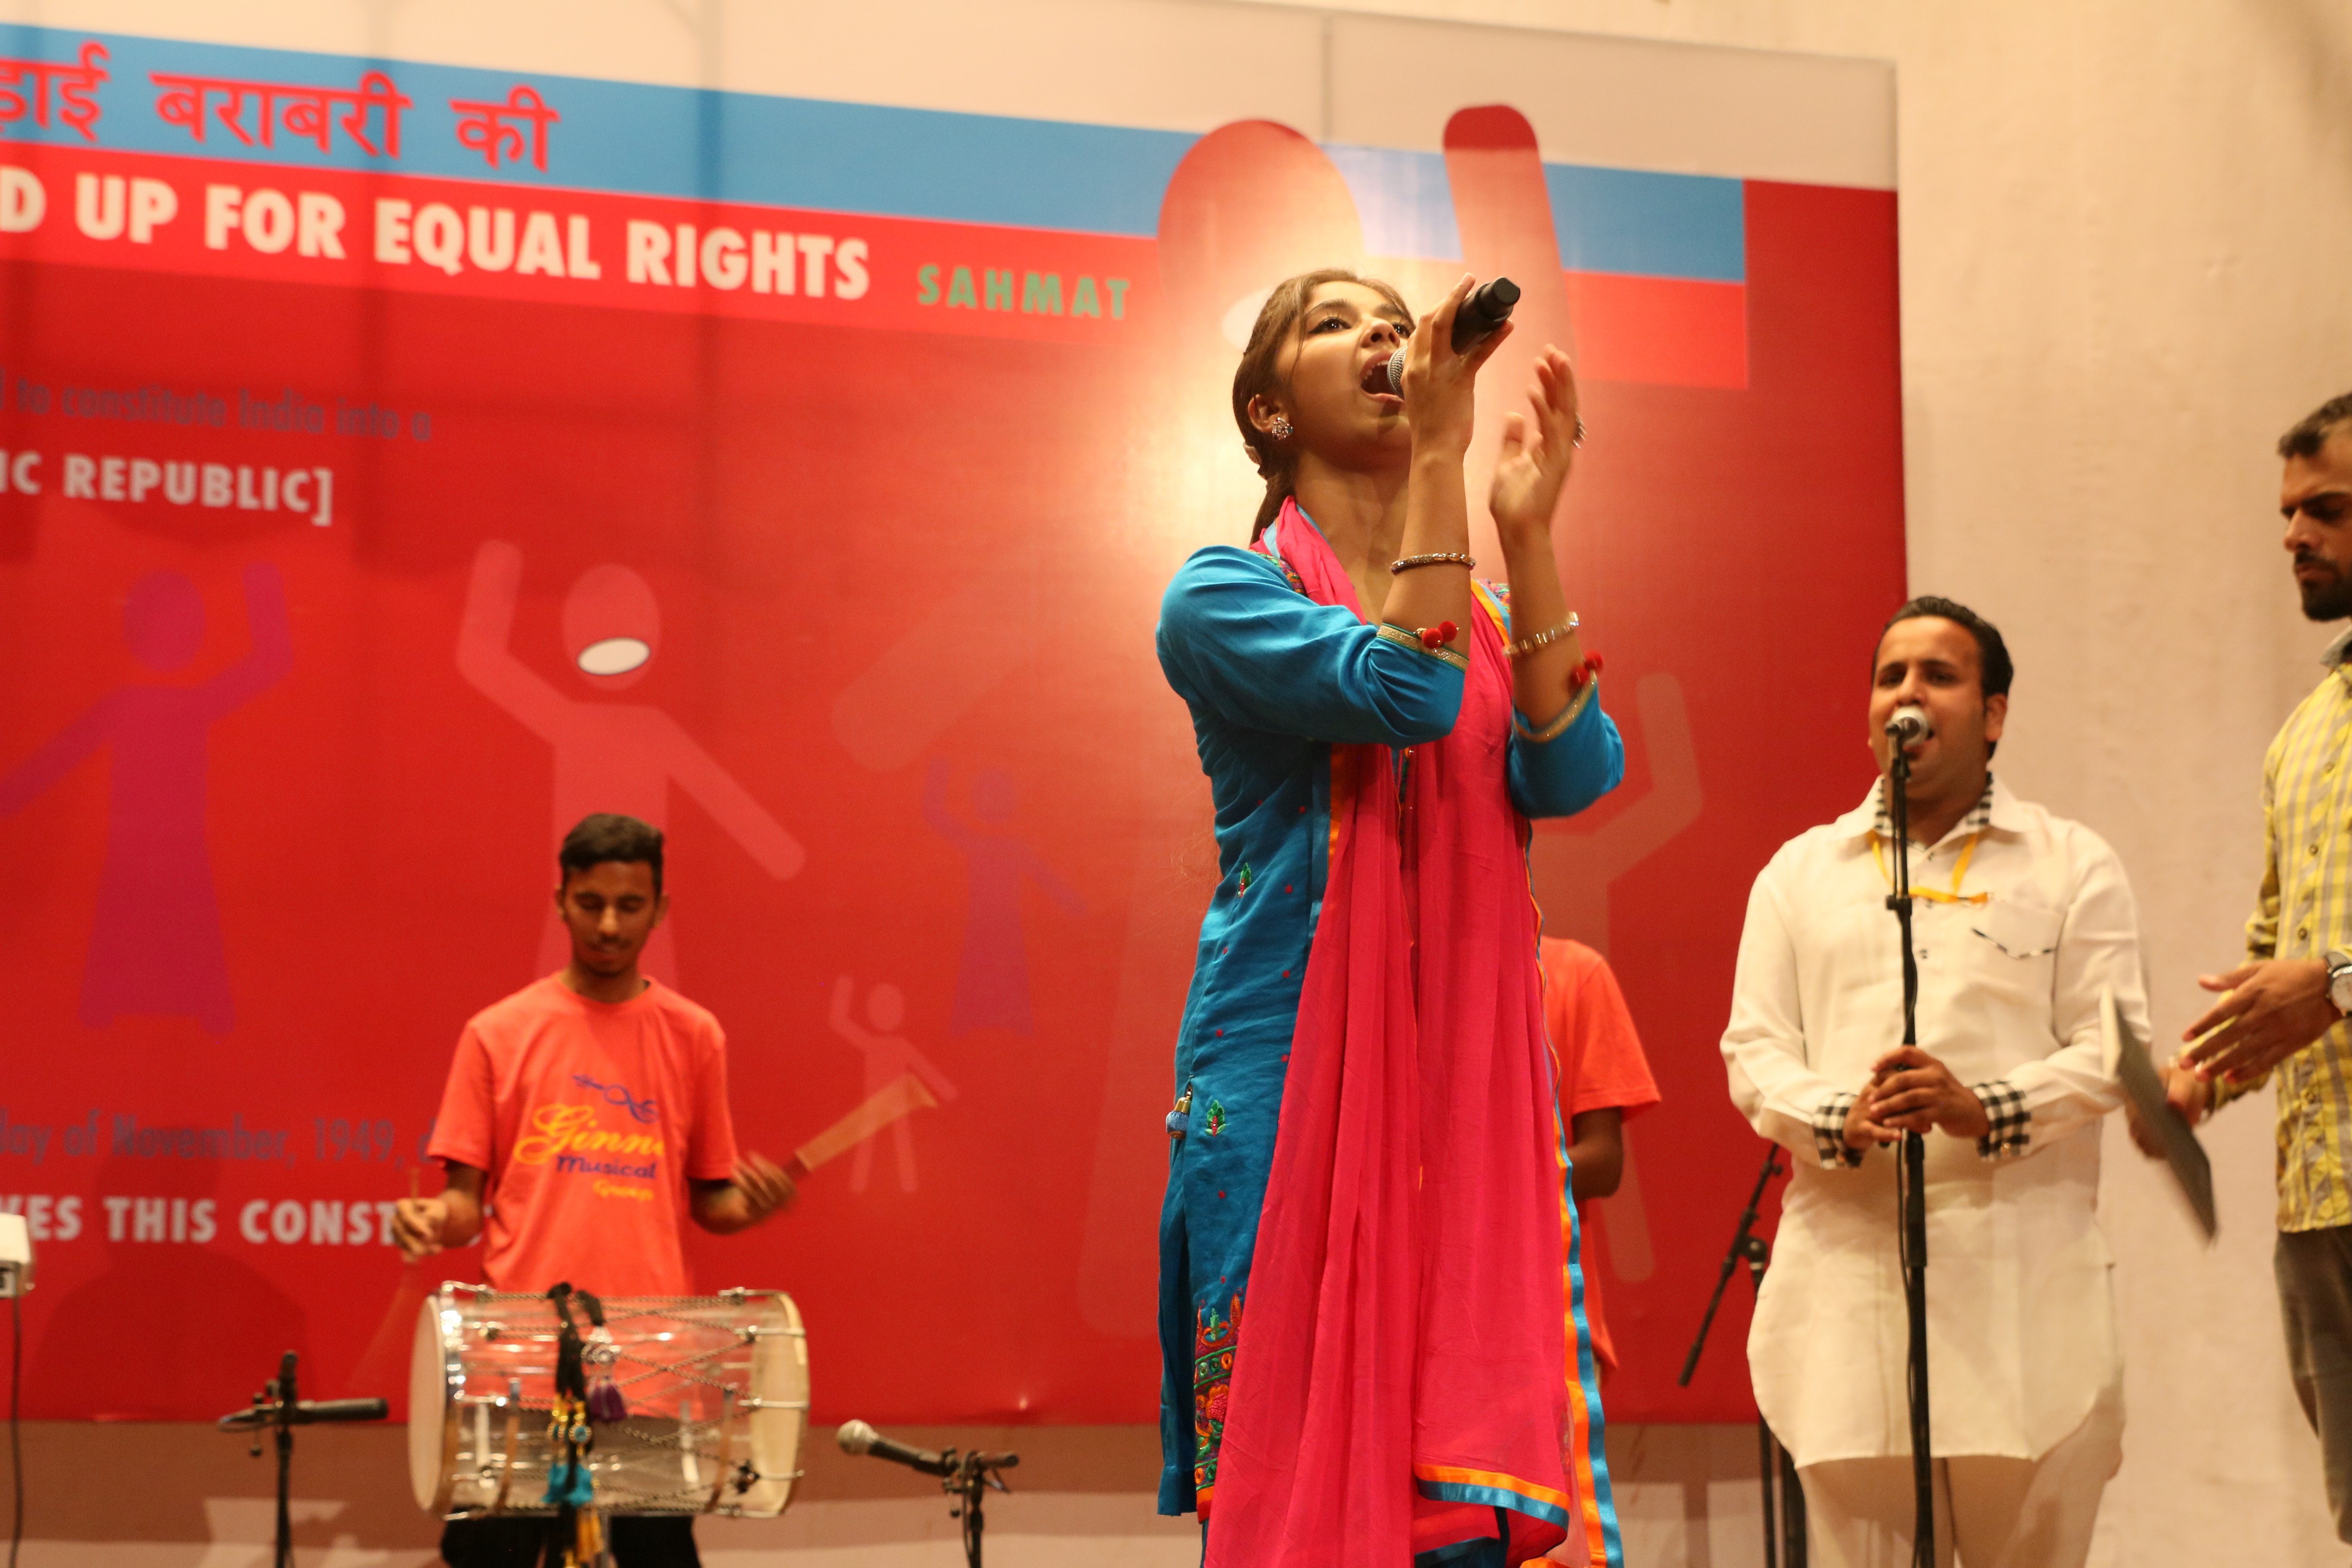 Ginni Mahi, a 19-year-old Dalit singer from the Chamar caste from Punjab, India, emphasises empowerment in her music.